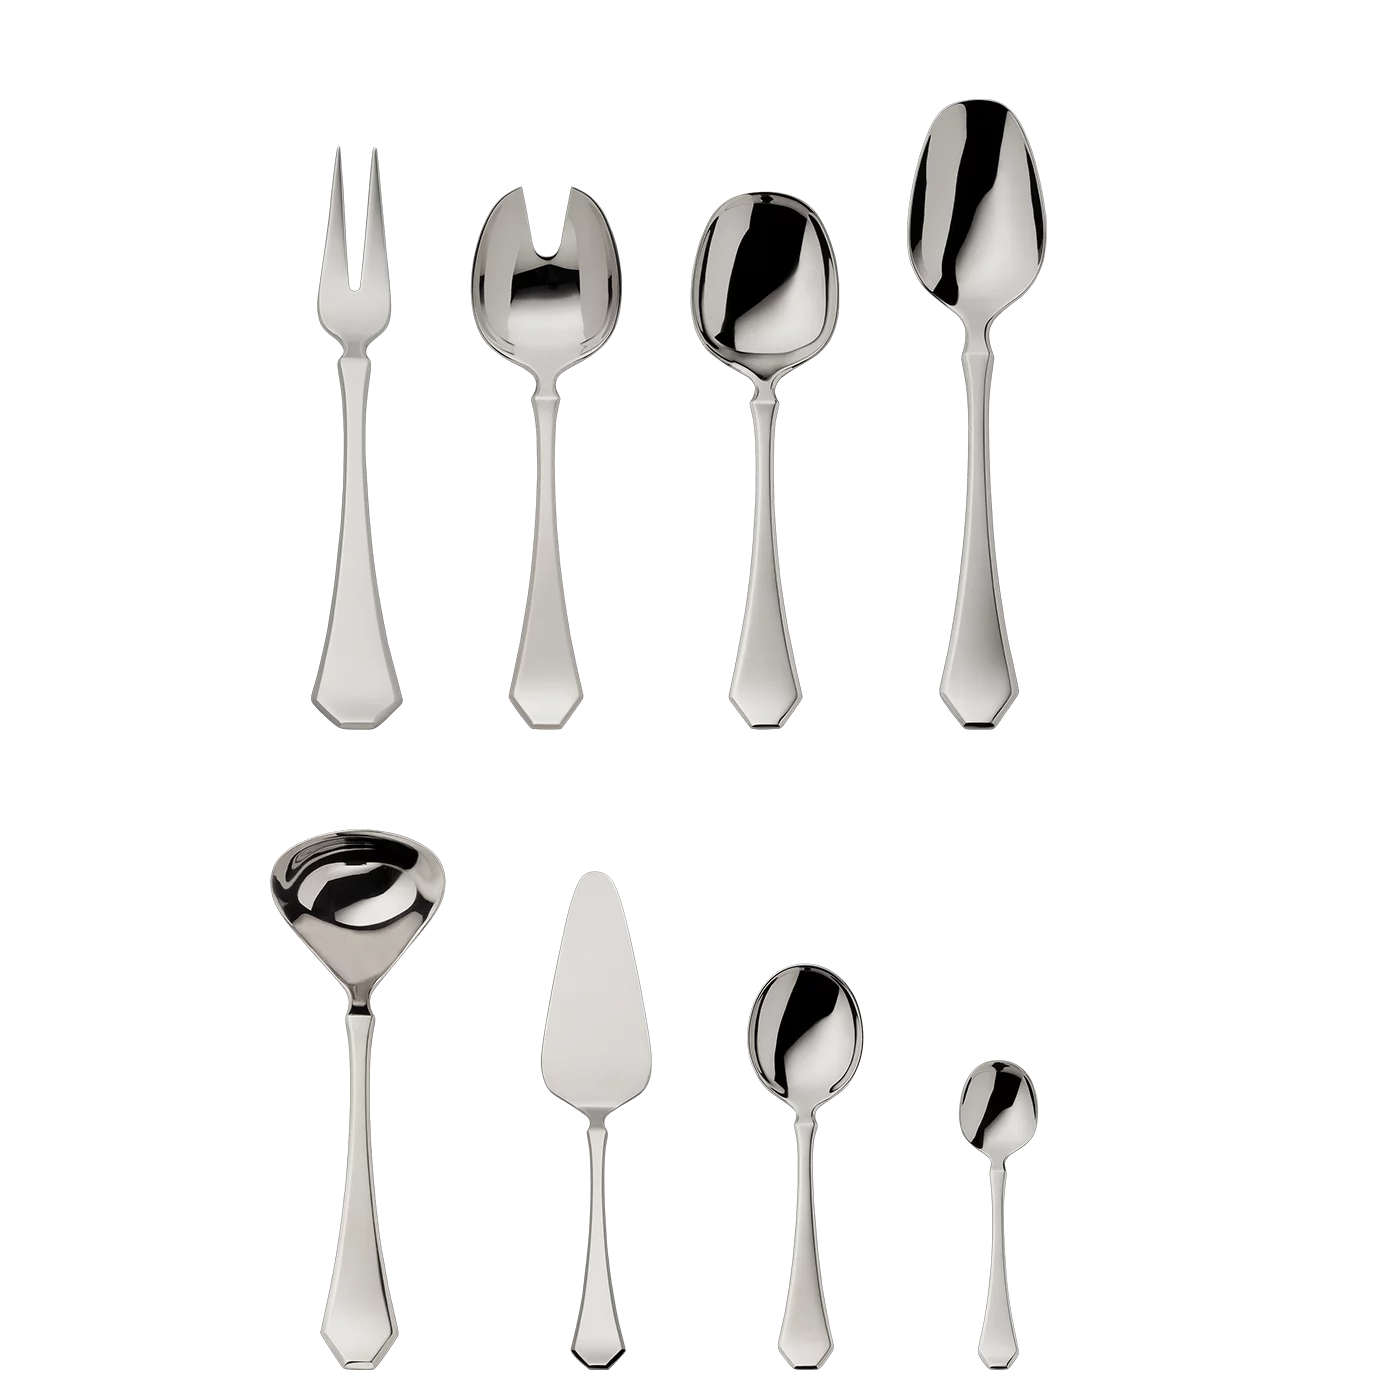 Baltic 10-piece set (18/8 stainless steel)